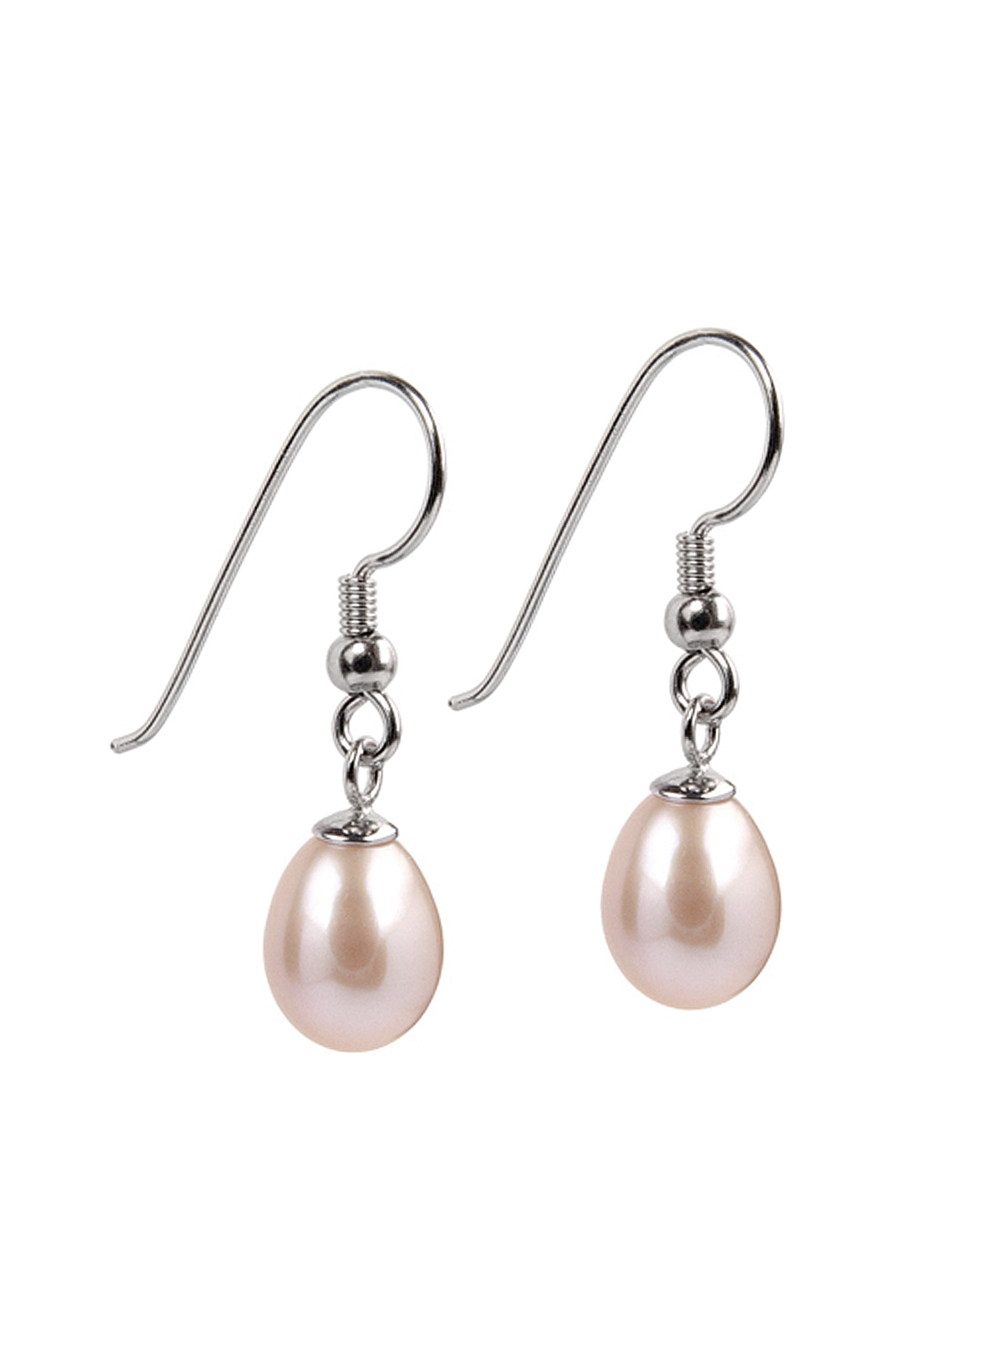 Sterling Silver Dangle Earrings with Pink Freshwater Pearls